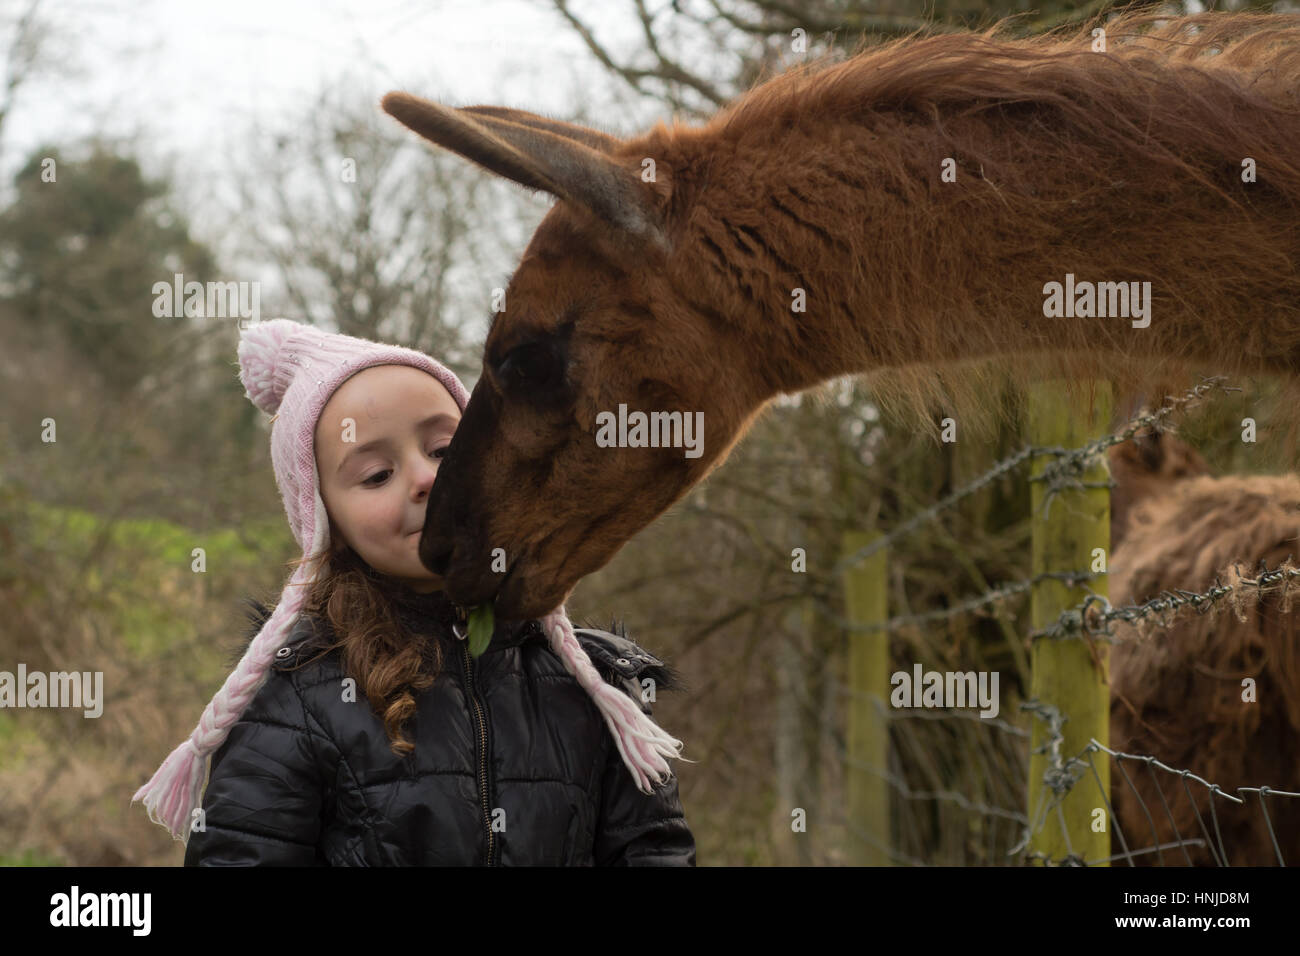 Young girl feeding leaf to llama from mouth. A child offers food to farm animal in a field in Somerset, England, UK Stock Photo